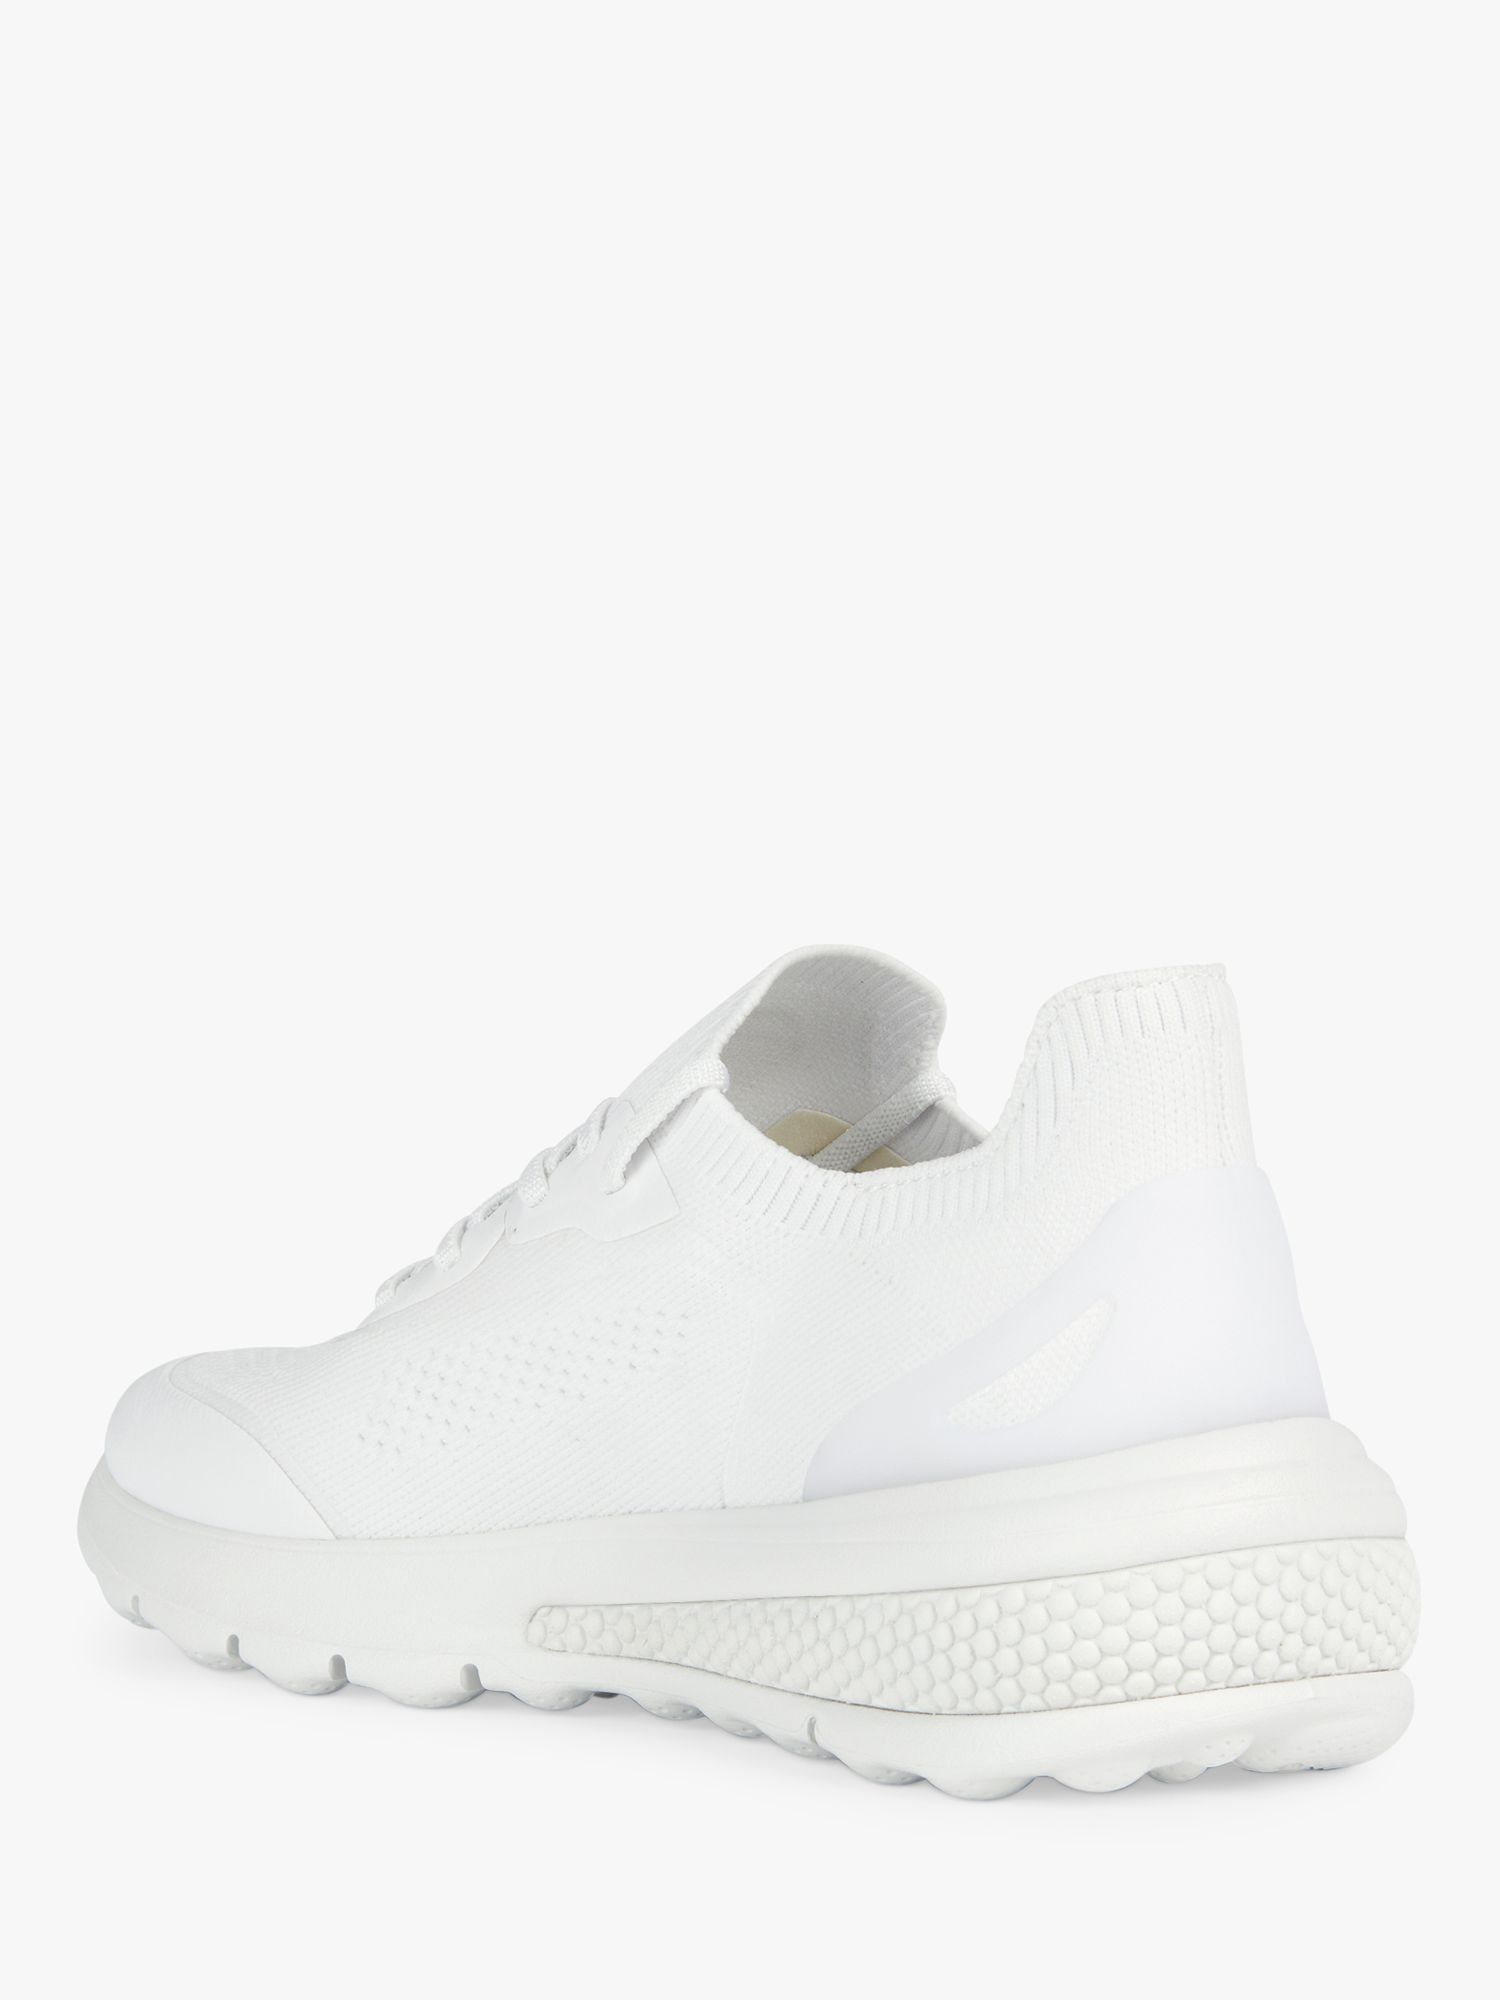 Geox Spherica Actif Trainers, White at John Lewis & Partners